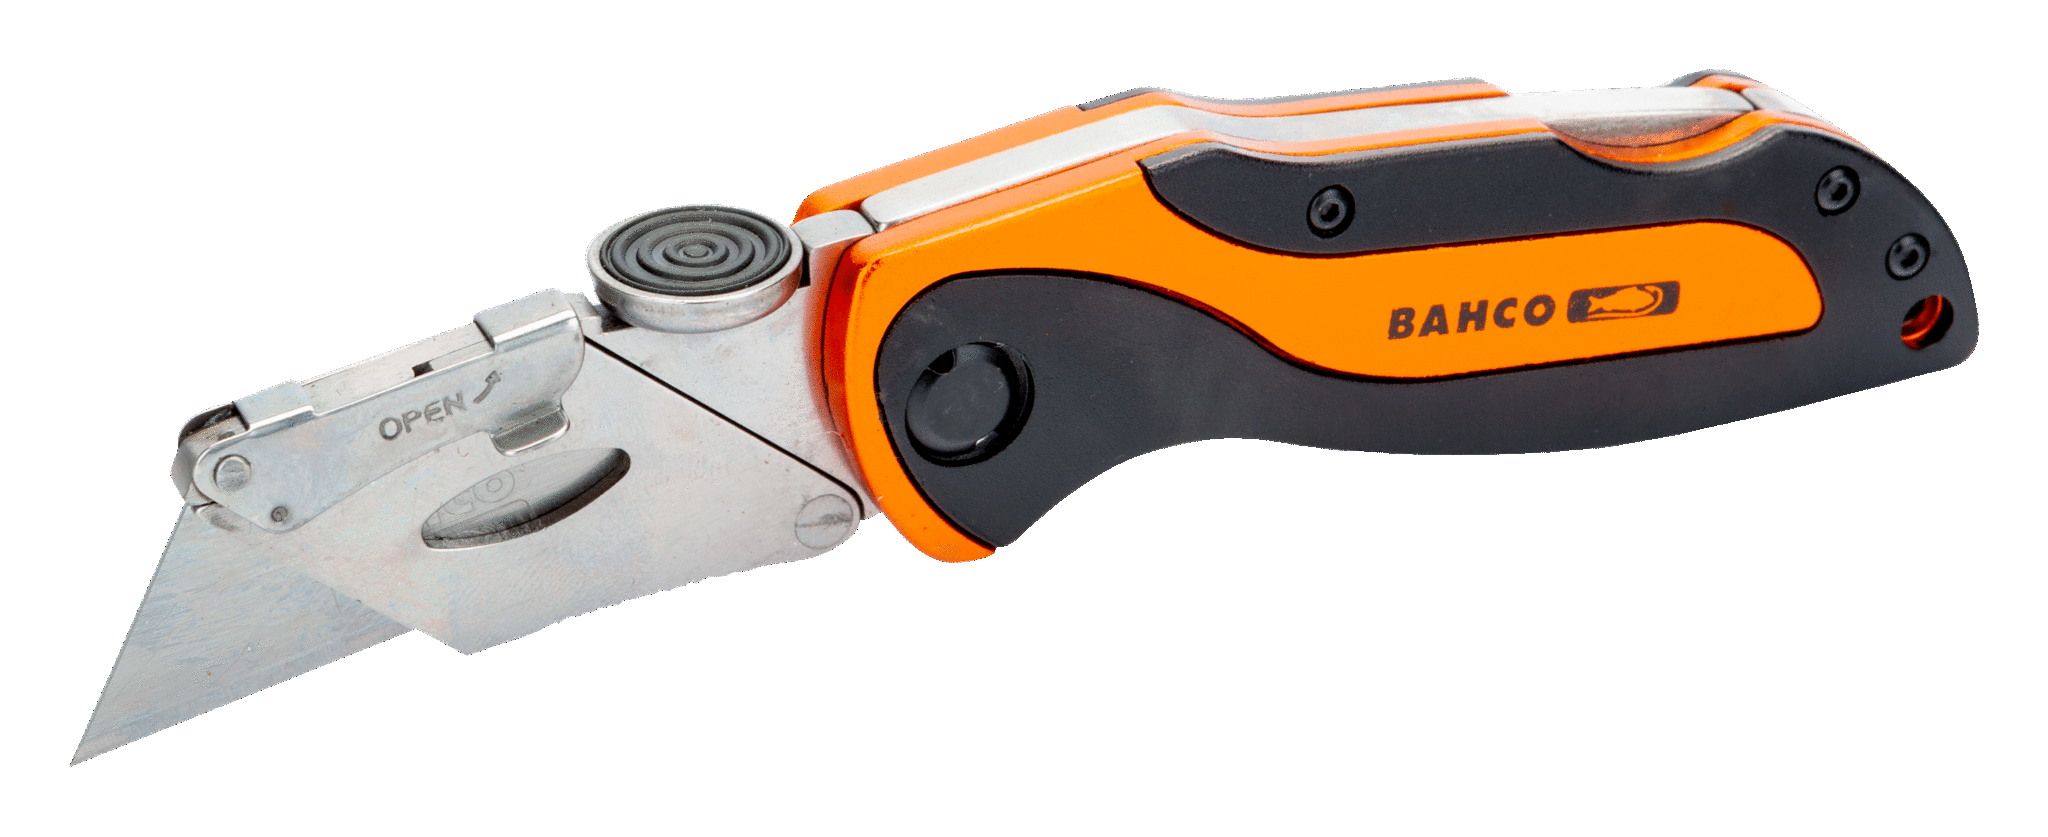 Sports Foldable Utility Knives with Aluminium Handle - KBSU-01 by Bahco